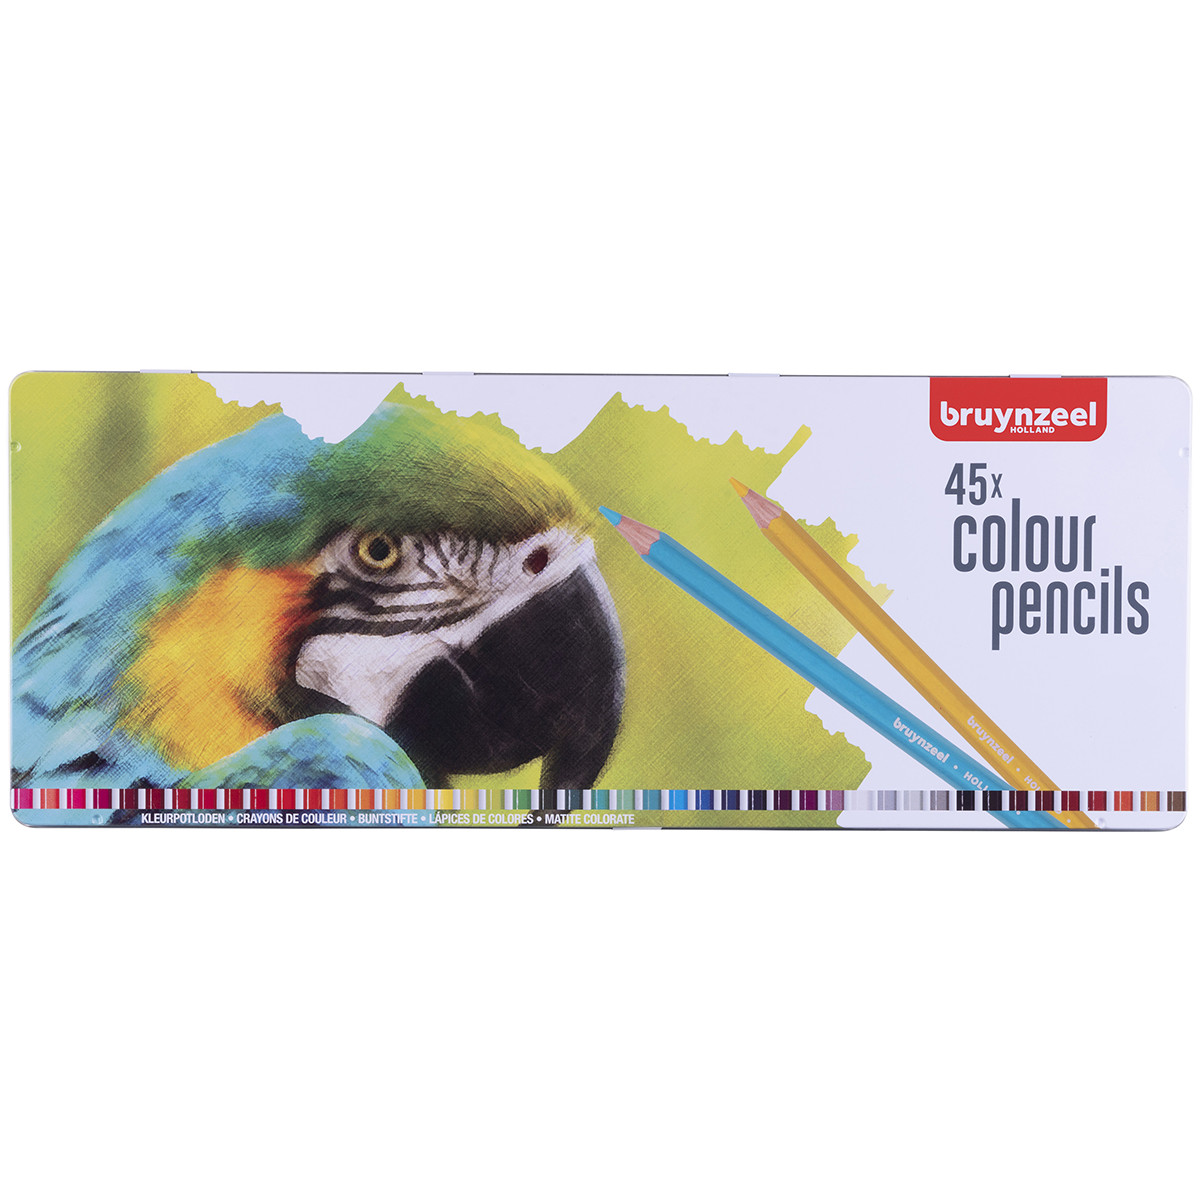 Bruynzeel Colouring Pencils - Parrot Set (Tin of 45)